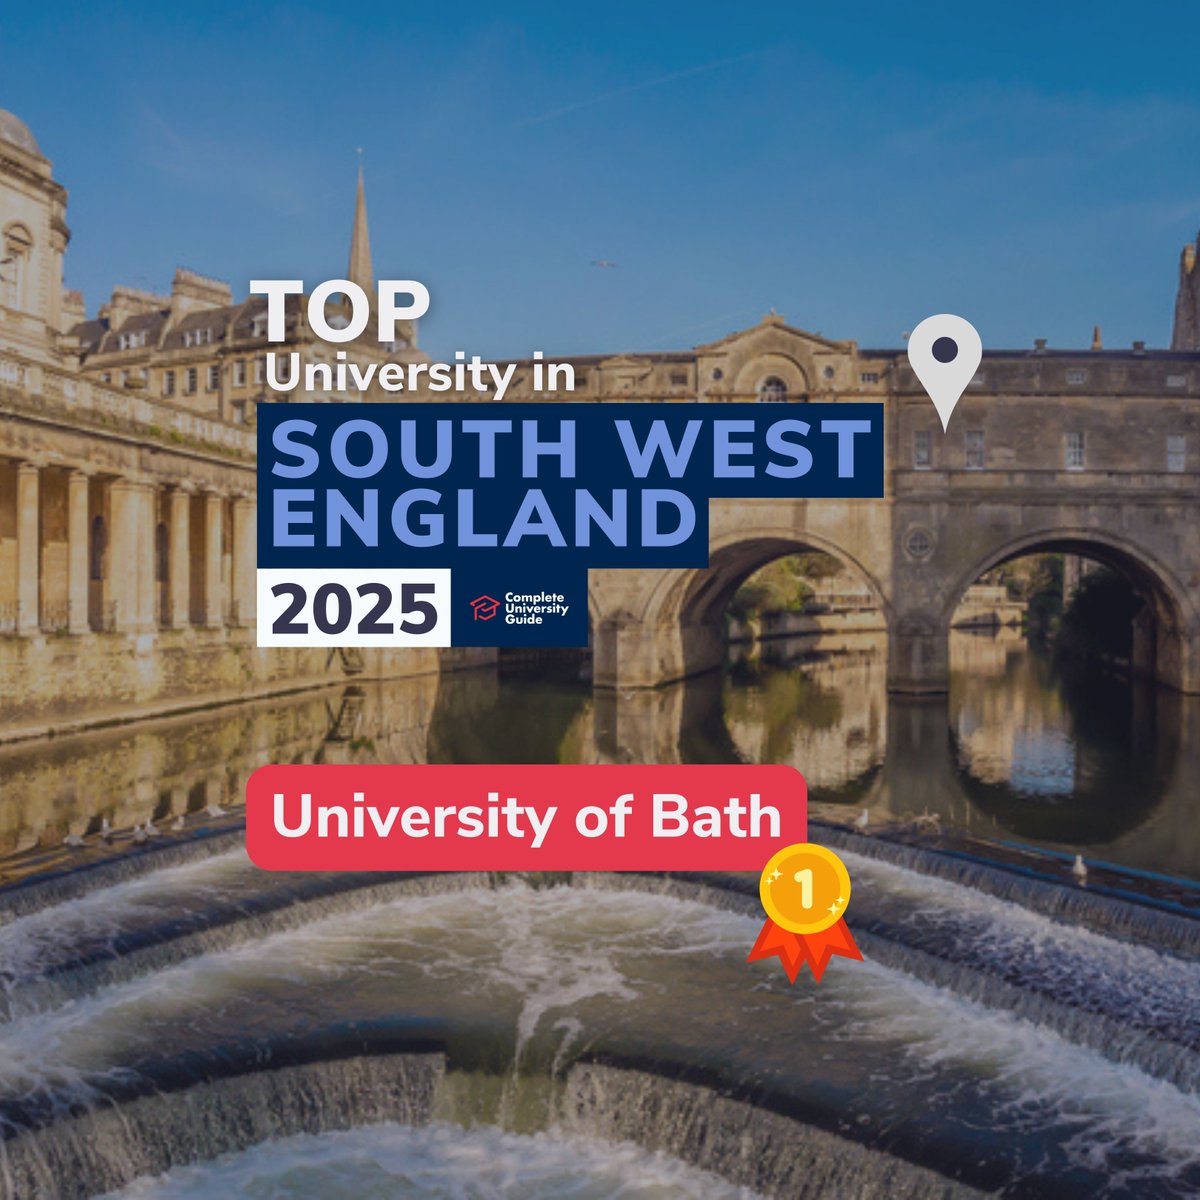 Well done to @UniofBath for coming top of the South West of England region league table.

Check out the full table here:
👉 bit.ly/3wsLGcO

#leaguetables2025 #leaguetables #rankings #university